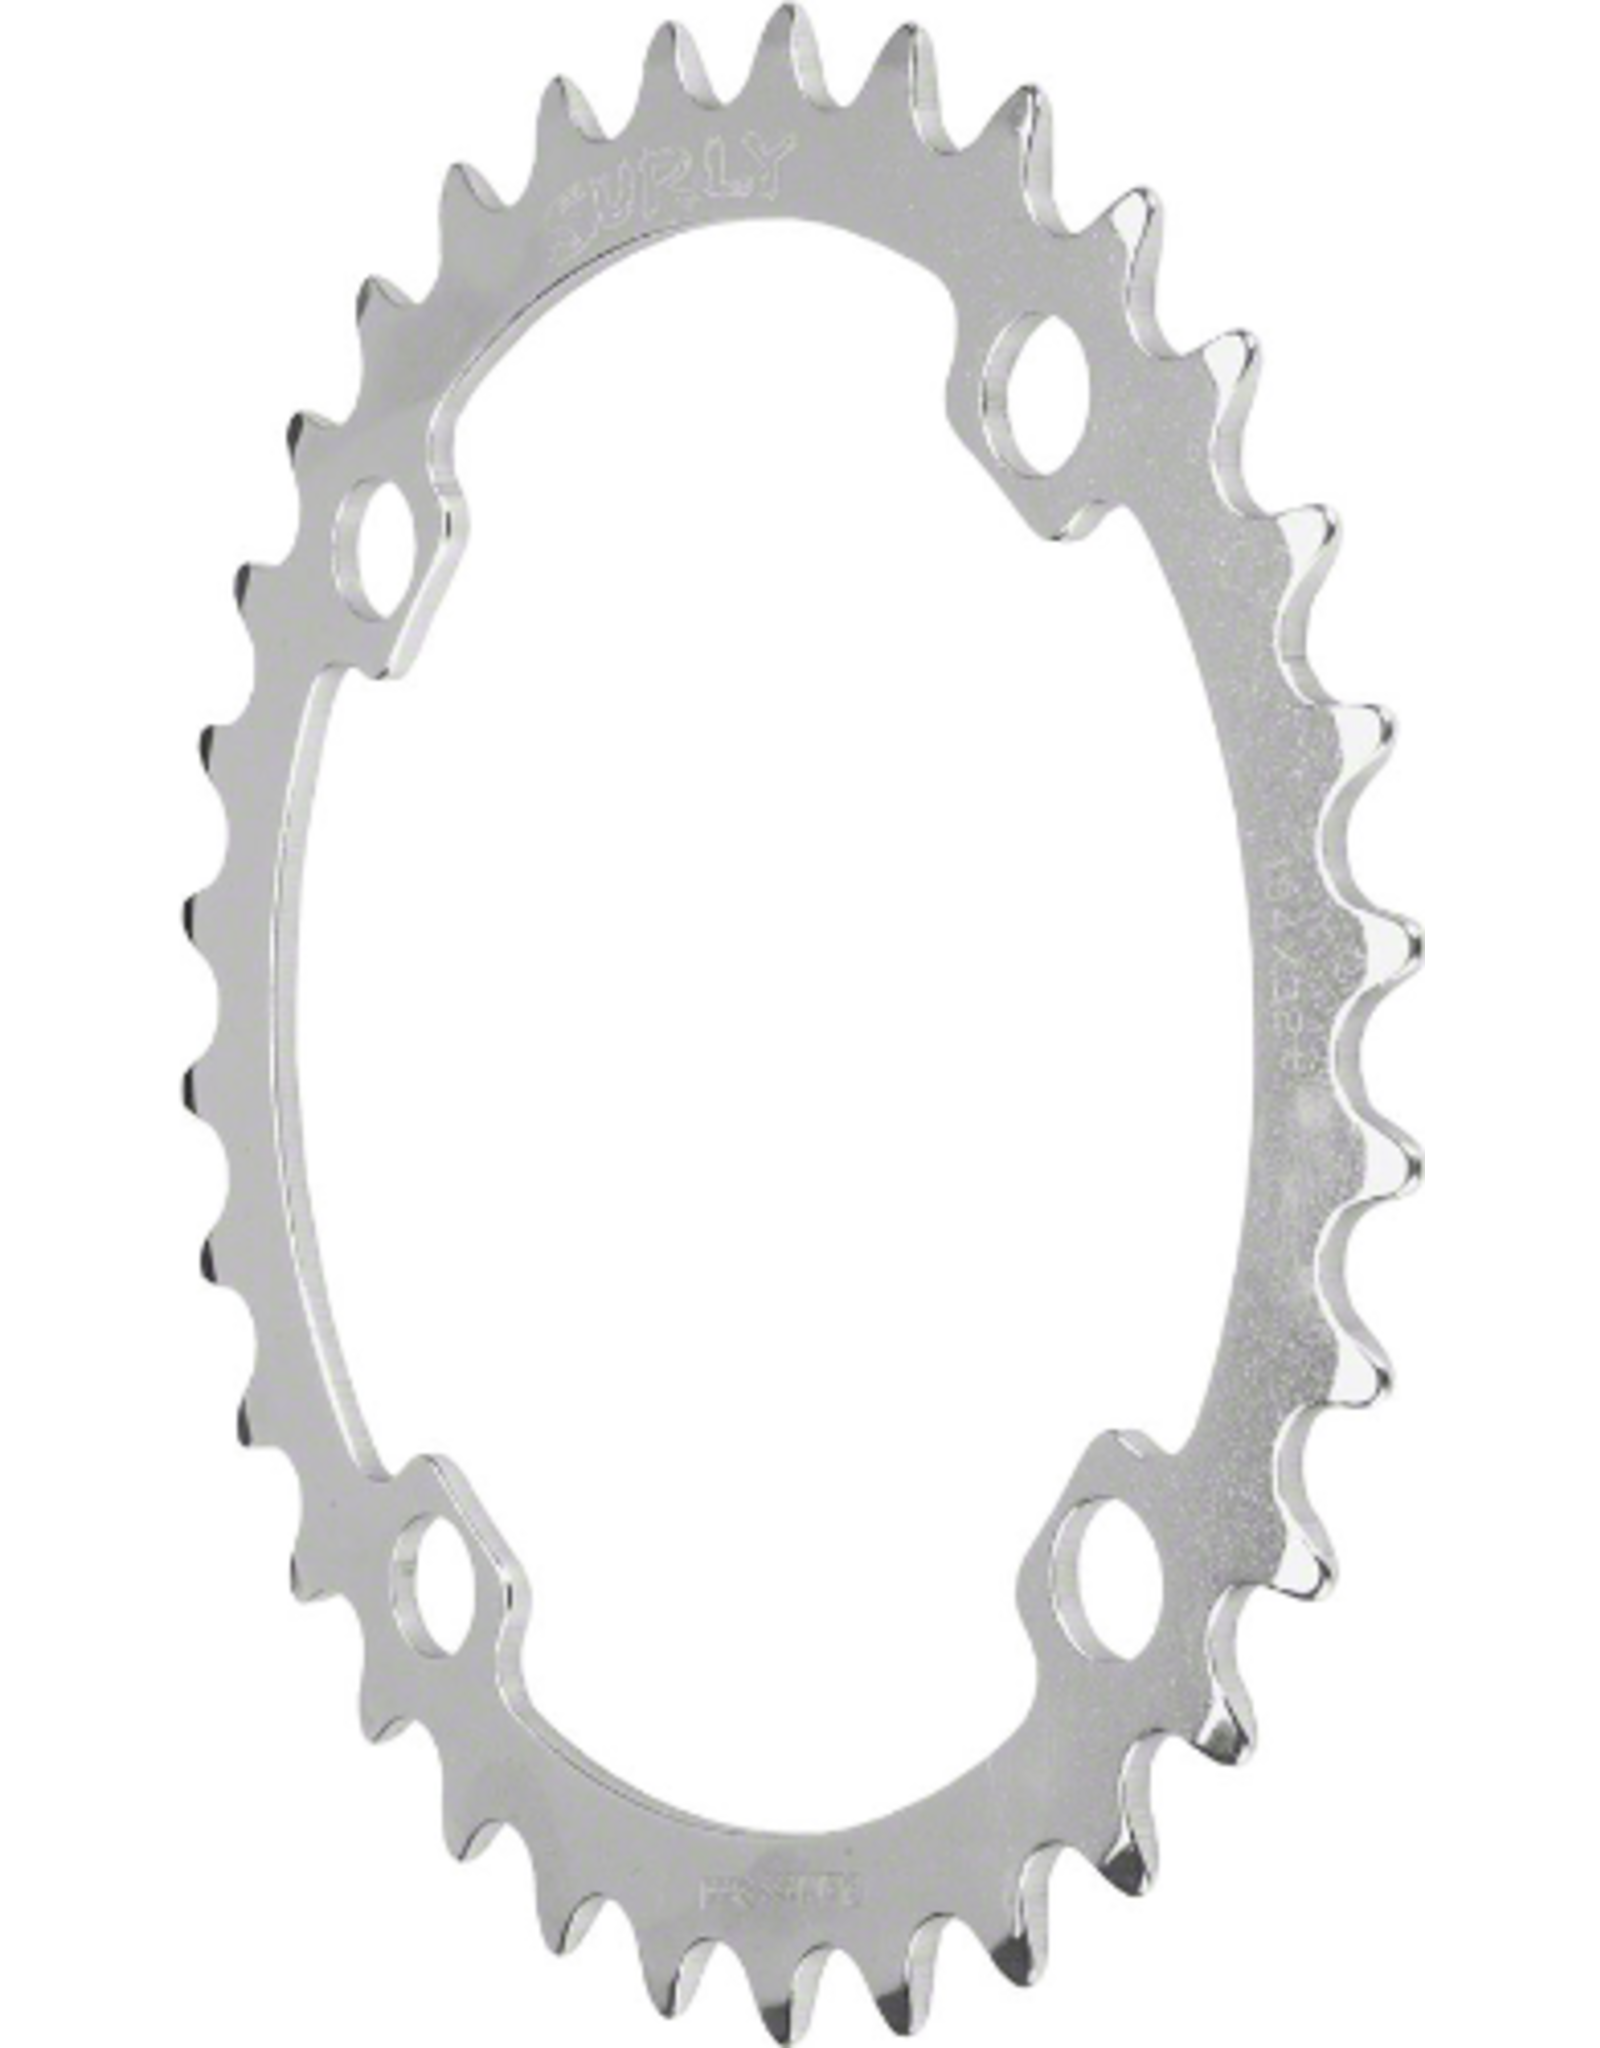 Surly Surly Stainless Steel Chainring